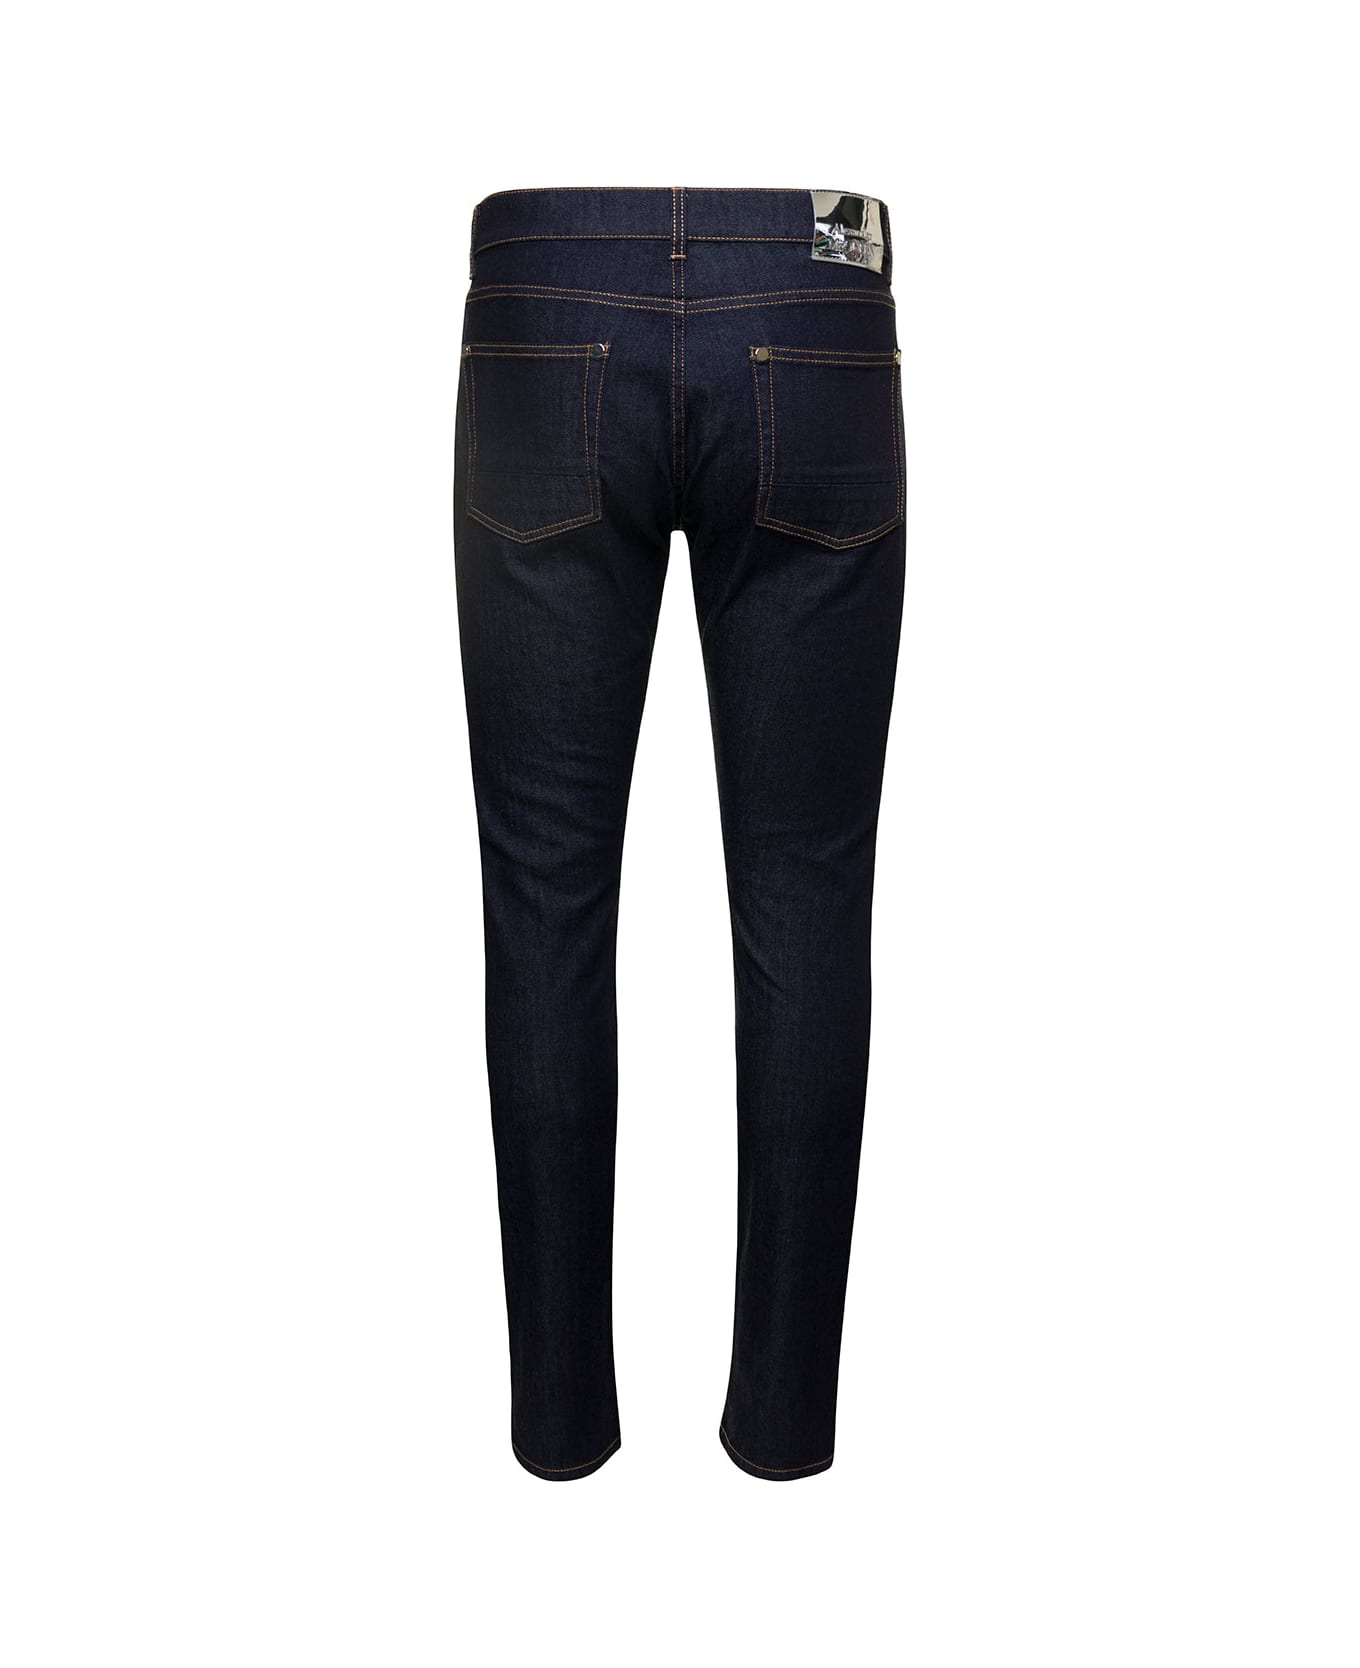 Alexander McQueen Blue Tight Pants With Metallic Piana Patch And Contrasting Stitching In Cotton Denim Man - Blu